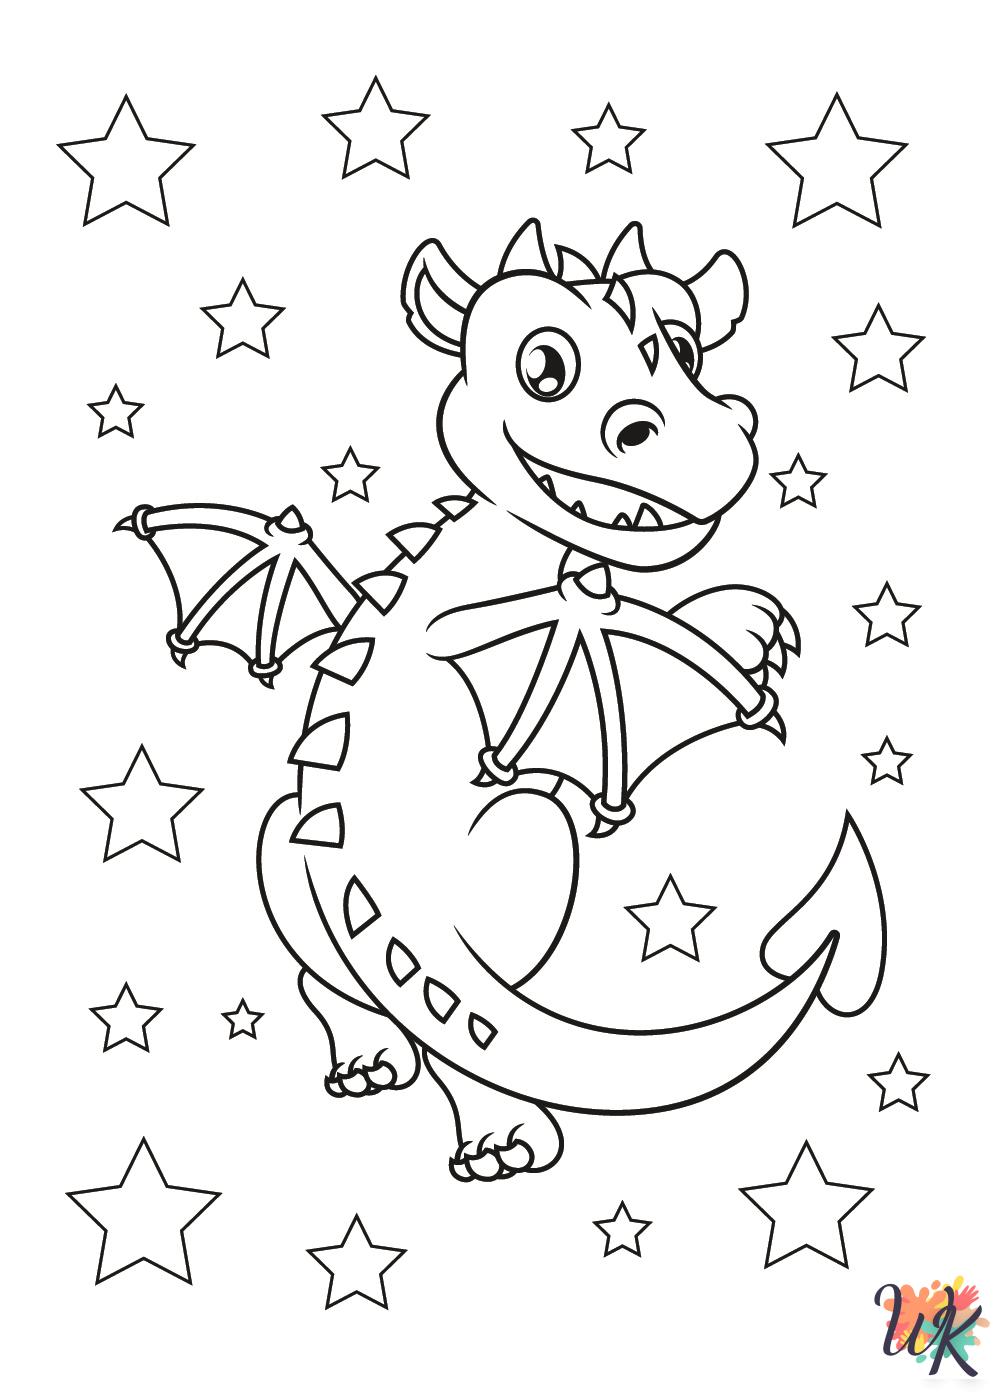 detailed Dragon coloring pages for adults